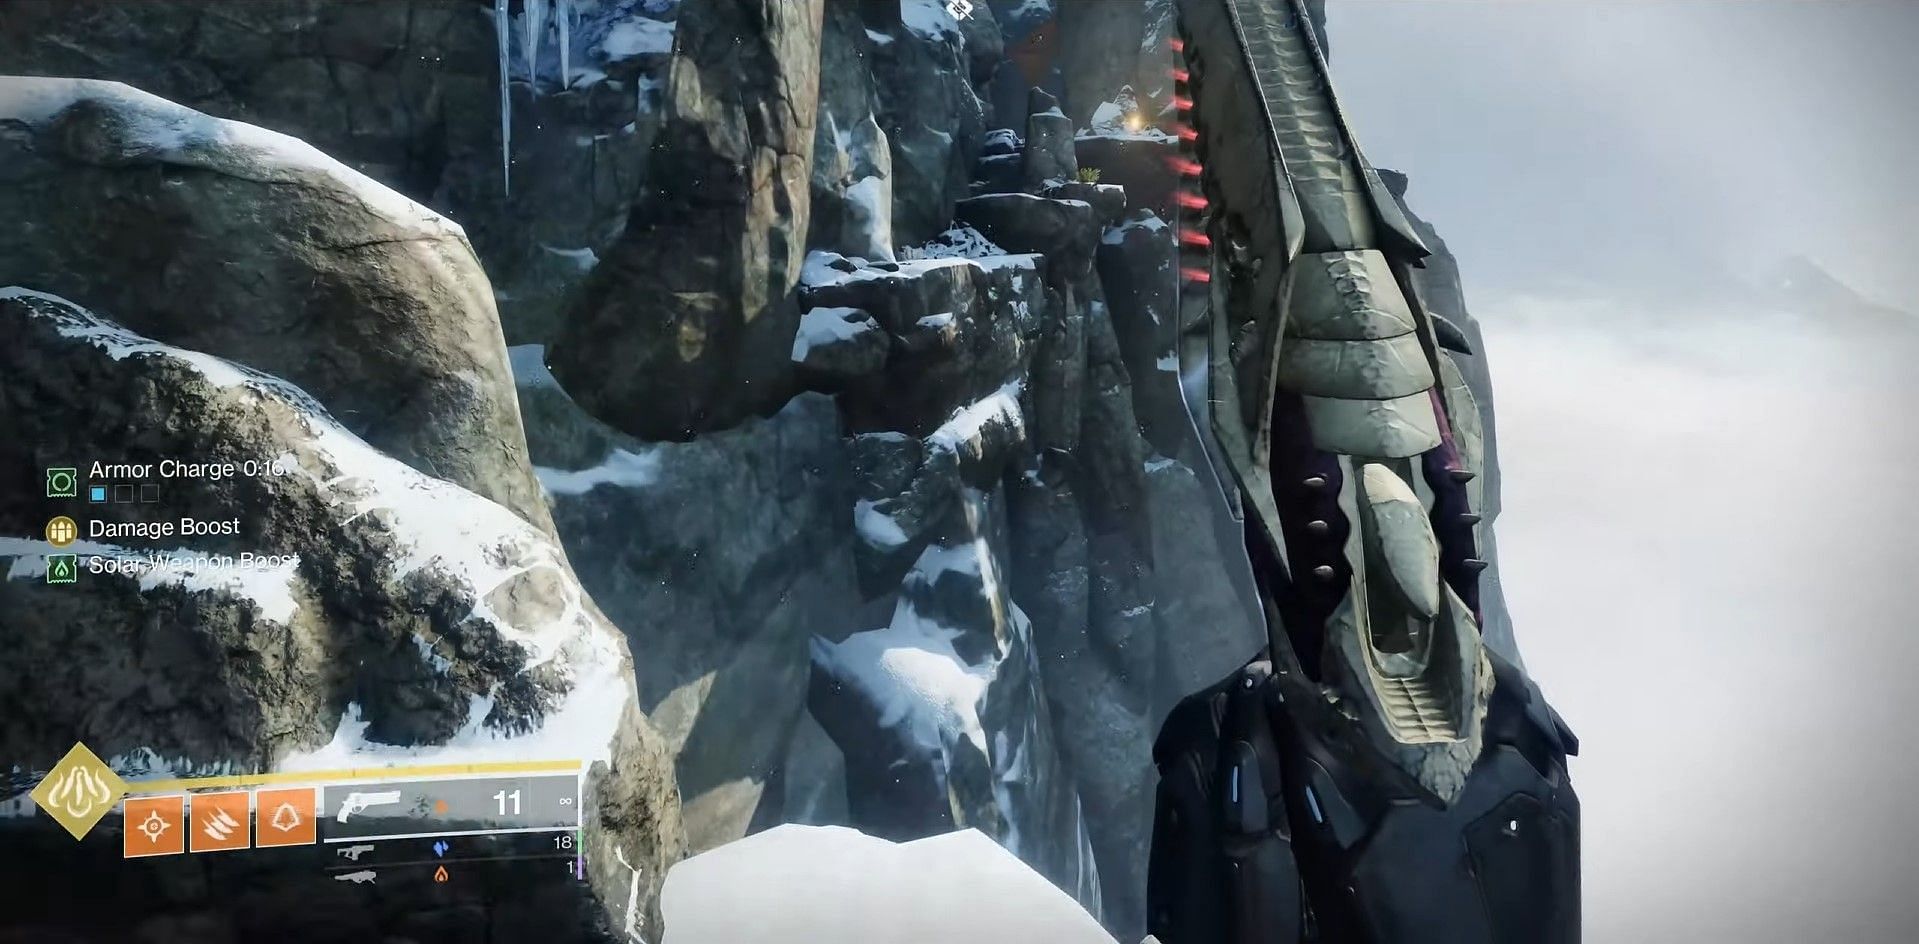 Jumping puzzle leading to the Level 1 door in Destiny 2 (Image via Bungie)